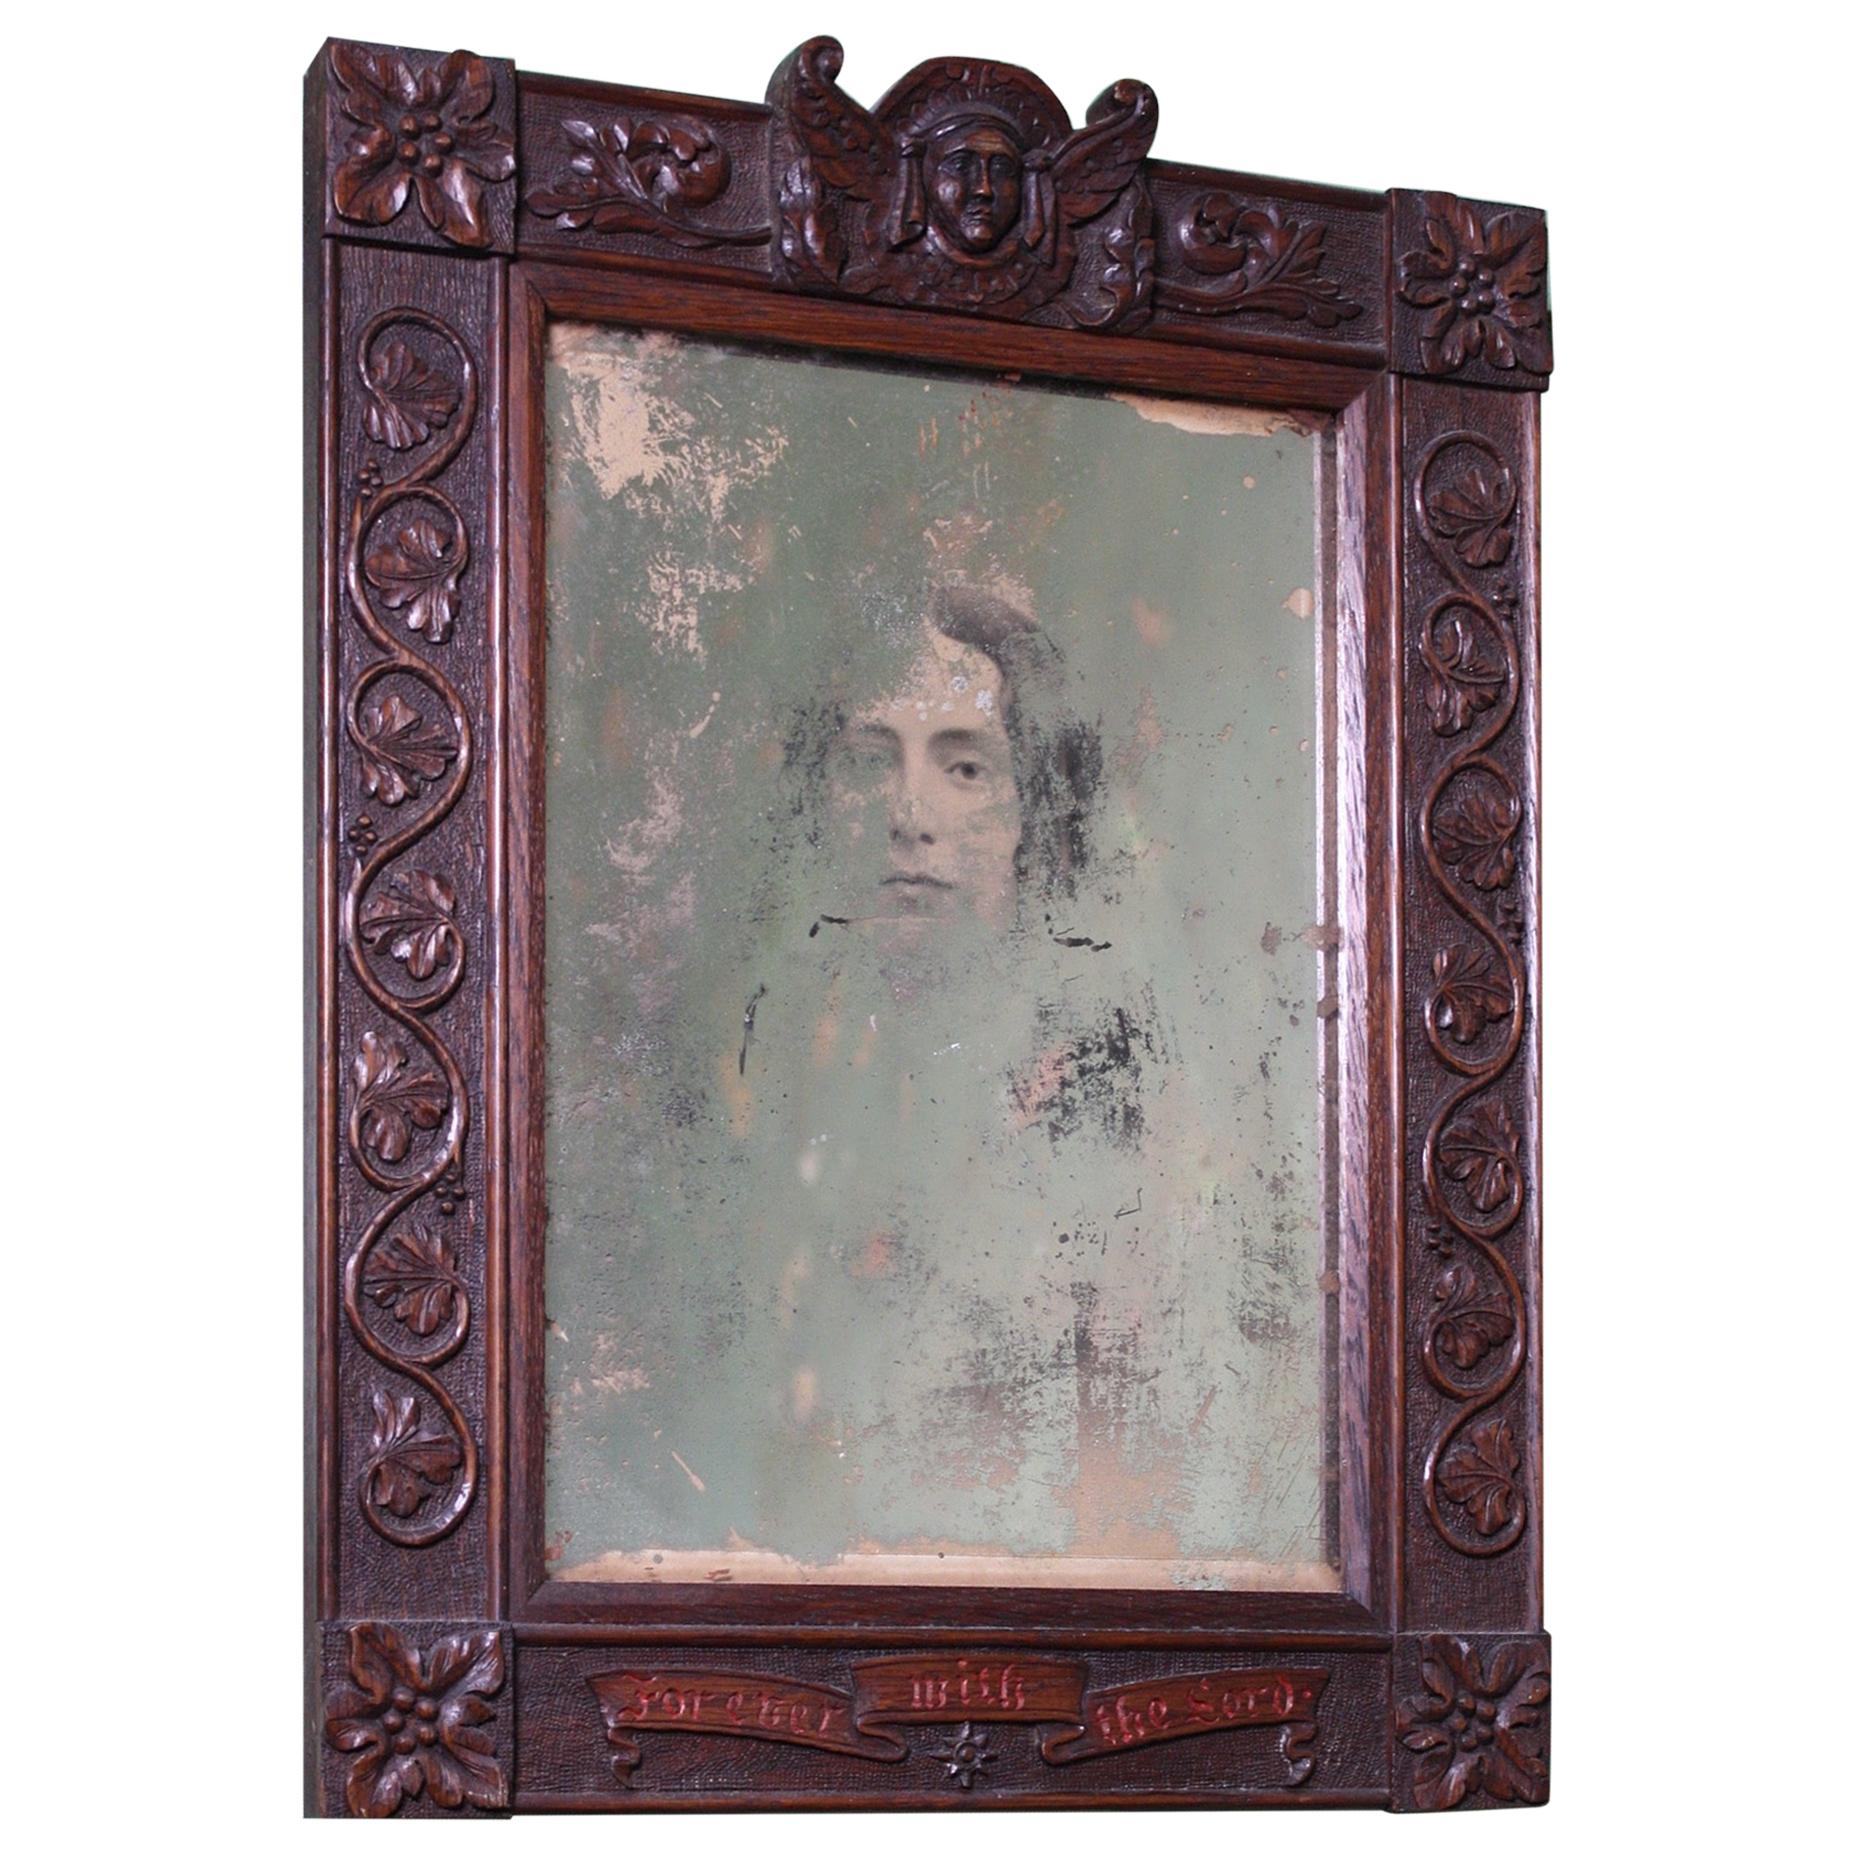 Early 20th Century Memento Mori Reminder Curiosity Face in the Mirror